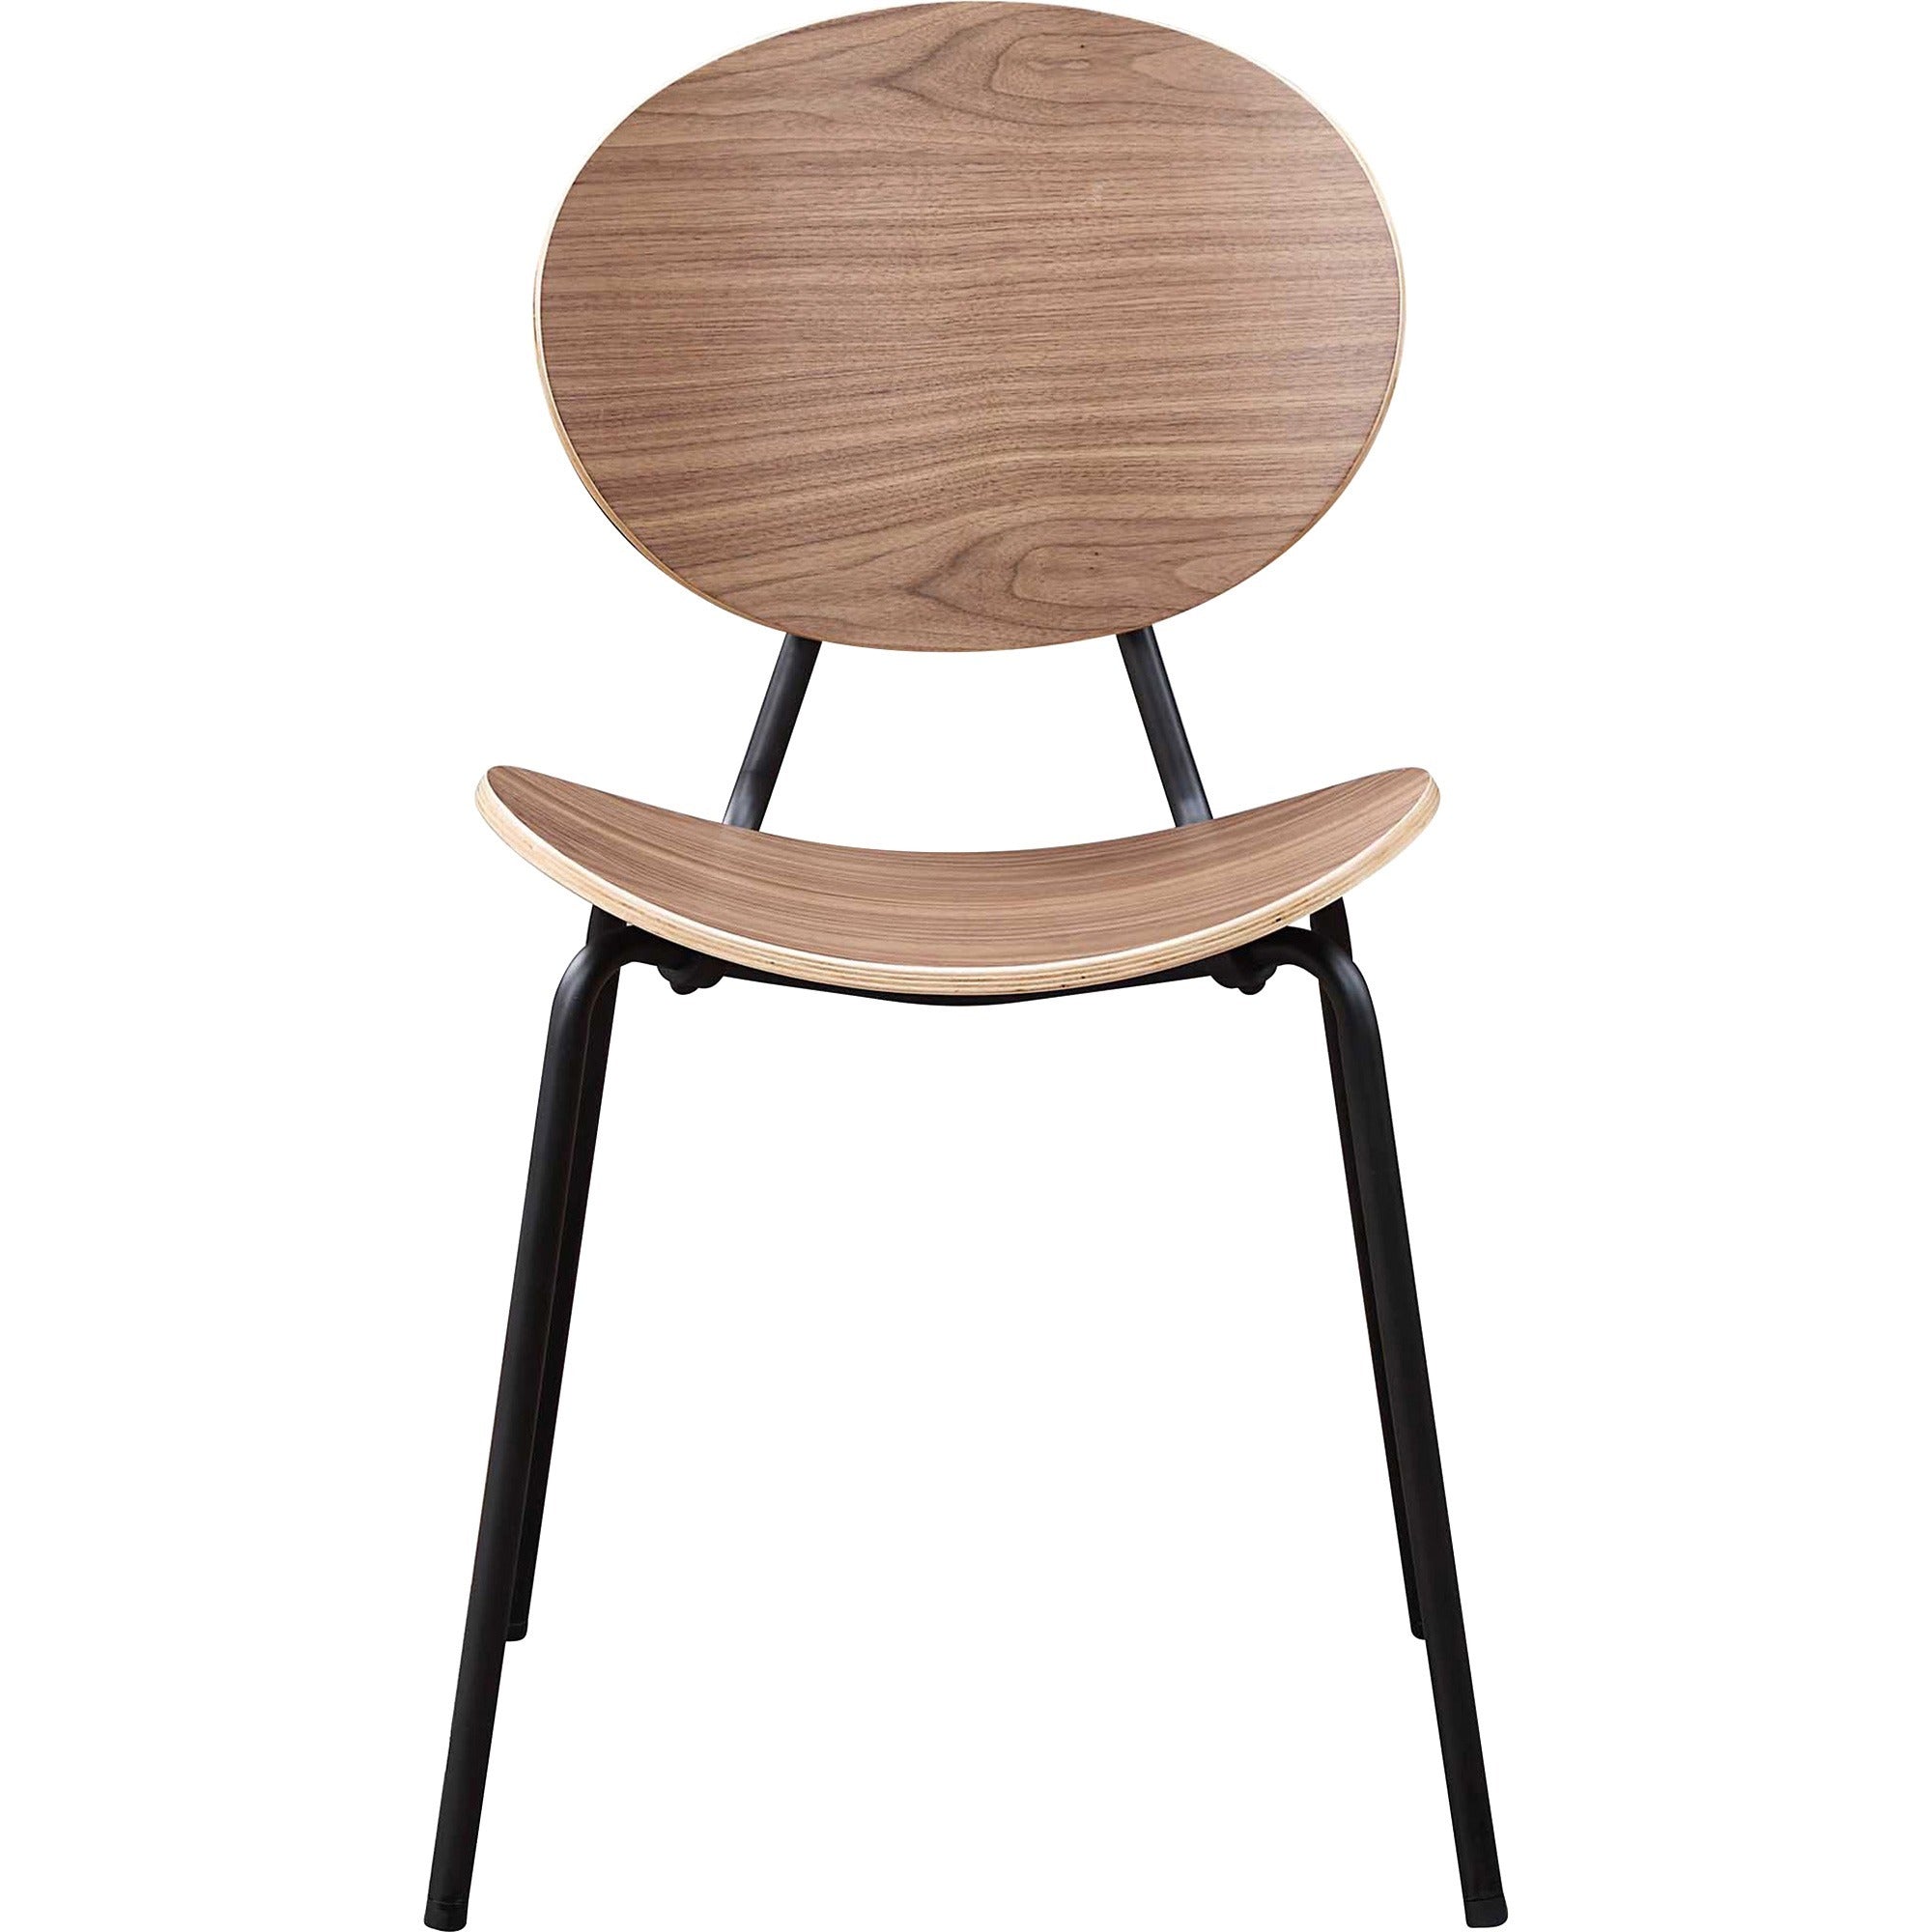 lorell-bentwood-cafe-chairs-plywood-seat-plywood-back-metal-powder-coated-steel-frame-walnut-2-carton_llr42962 - 2